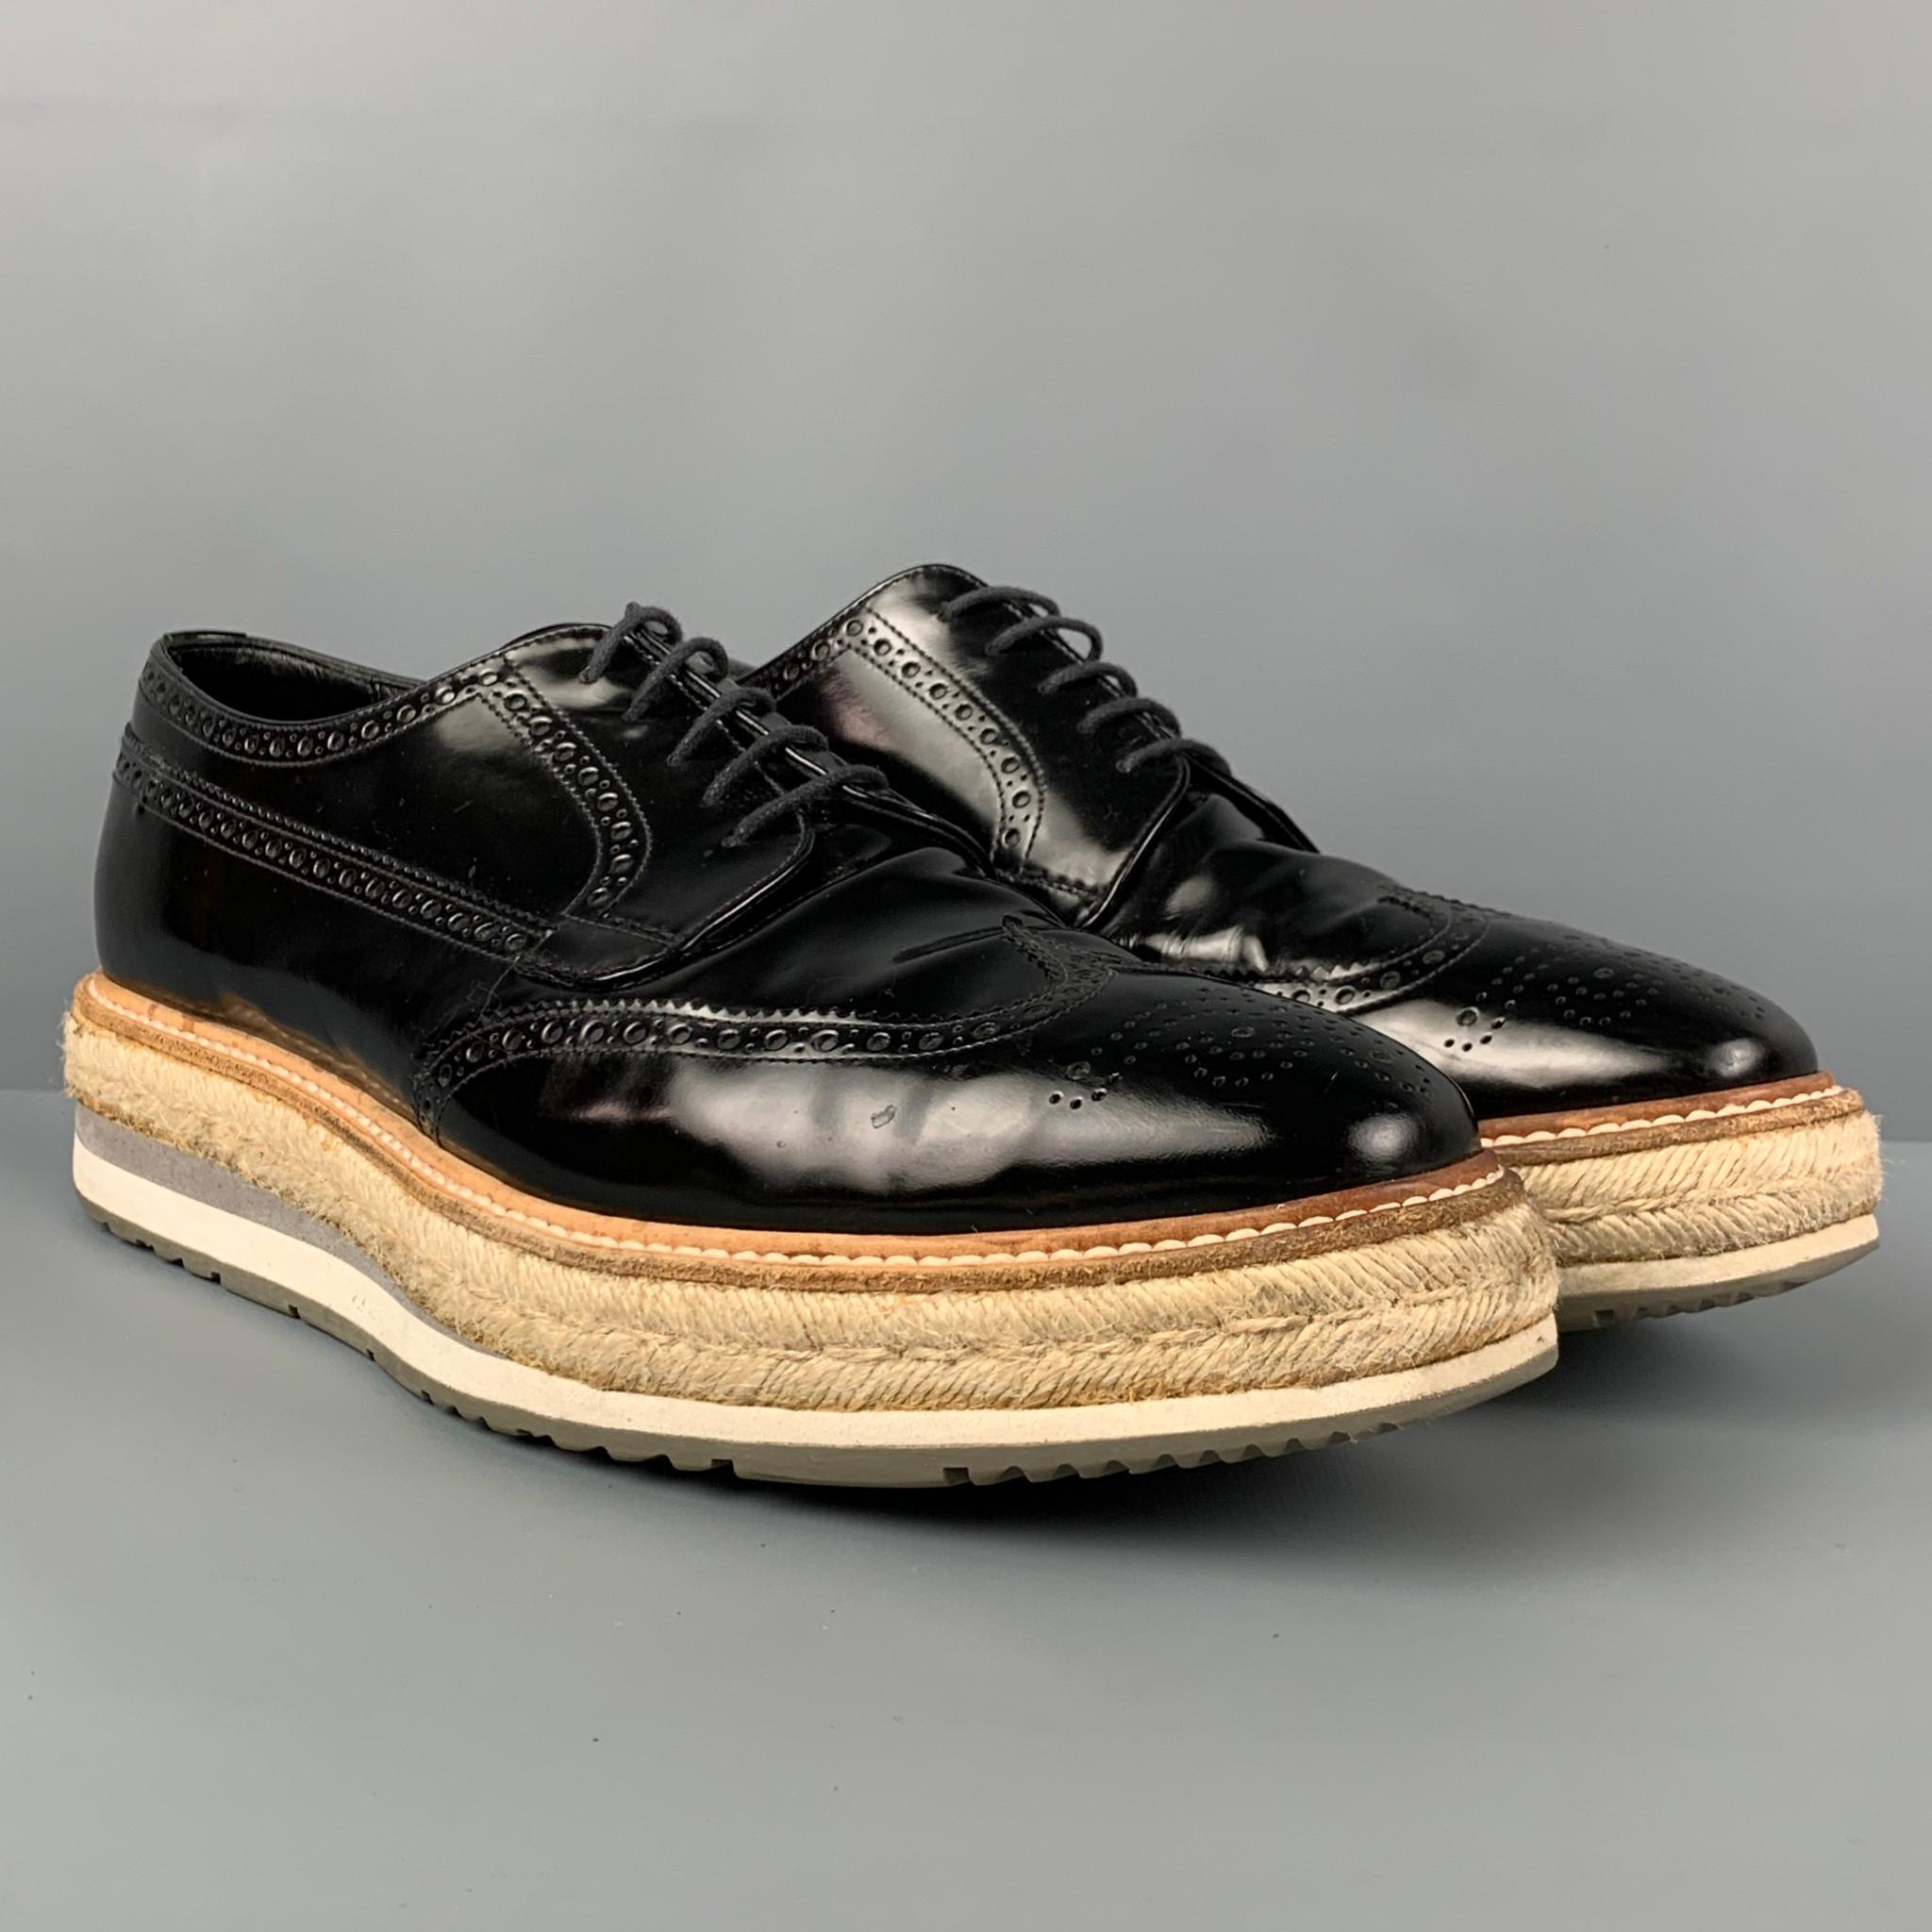 PRADA shoes comes in a black perforated leather featuring a wing tip style, jute trim rubber platform, square toe, and a lace up closure. Made in Italy.

Very Good Pre-Owned Condition. Light wear. As-Is.
Marked: 2EG015 9.5

Outsole: 13 in. x 4.25